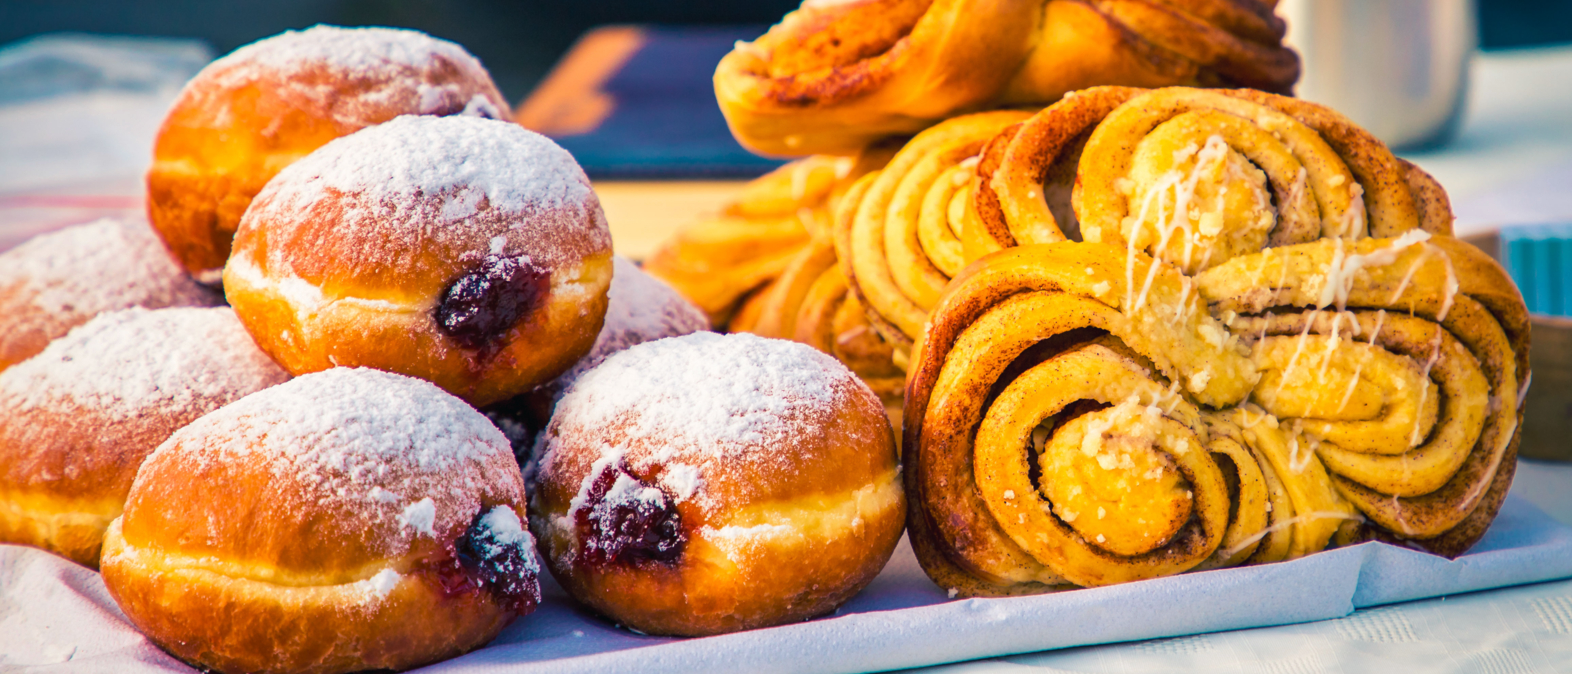 Street market with freshly cooked donuts for sale in Ireland